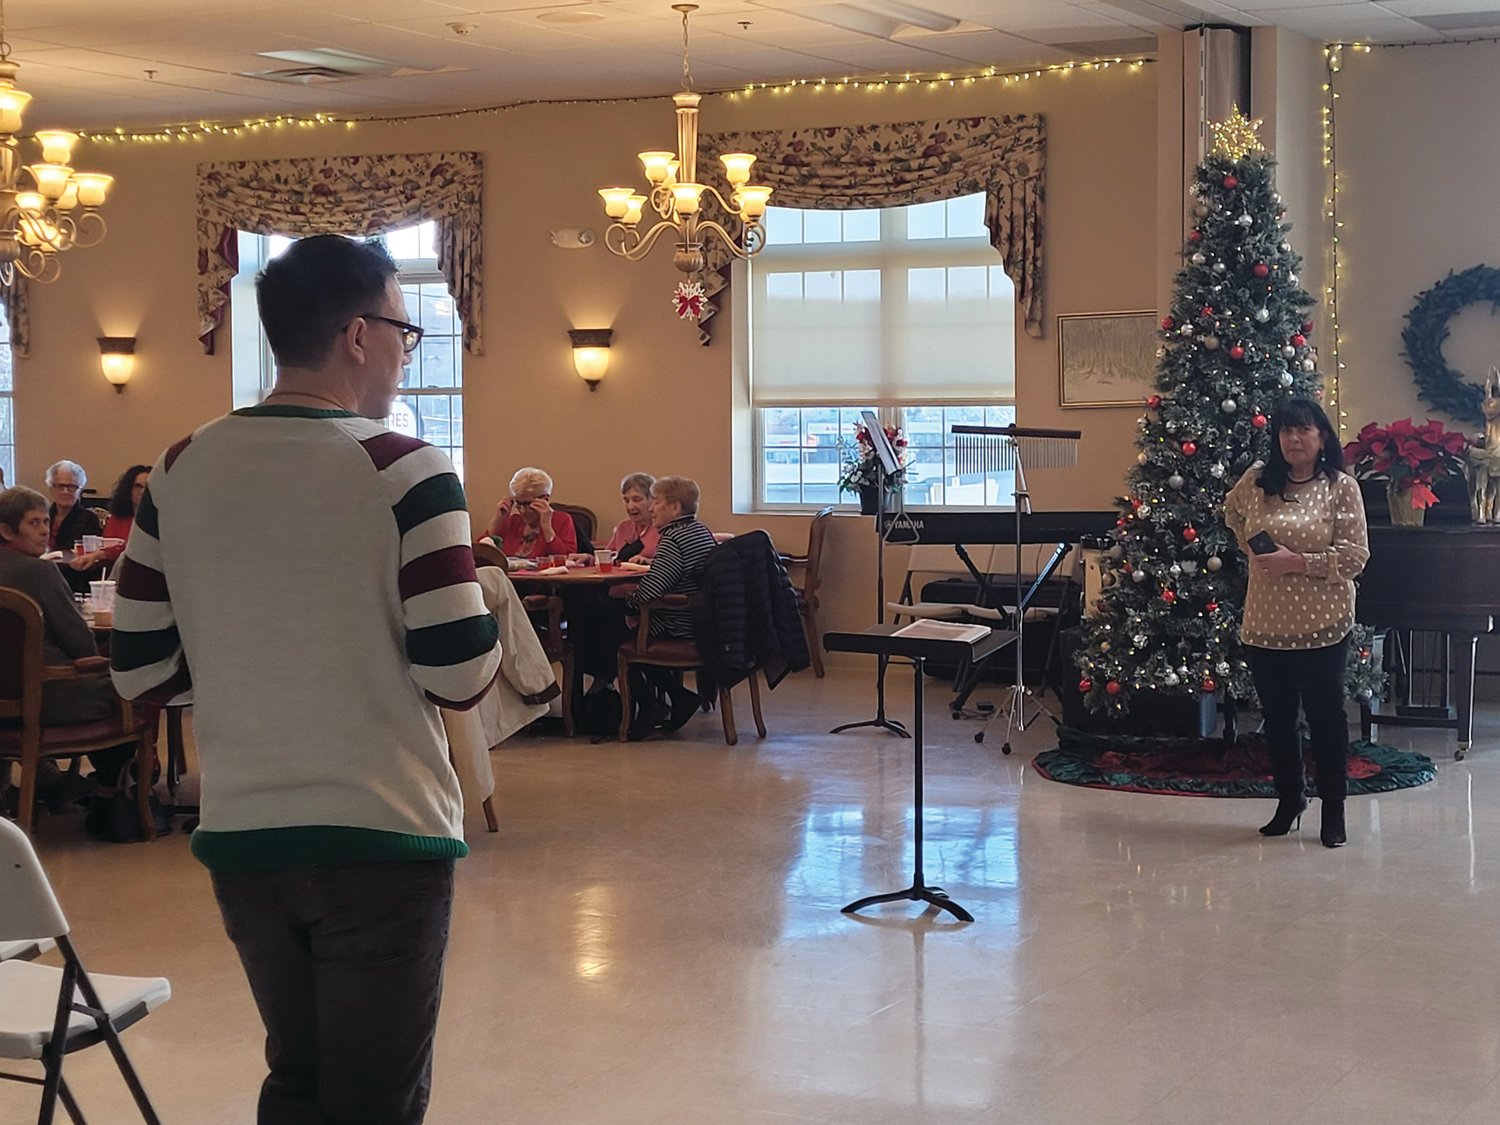 CHRISTMAS PARTY: Members of the Johnston Senior Center had drinks and snacks prior to a rousing performance by the Johnston High School Chorus. Senior Center Director Matt Bolton introduced the chorus to the audience.